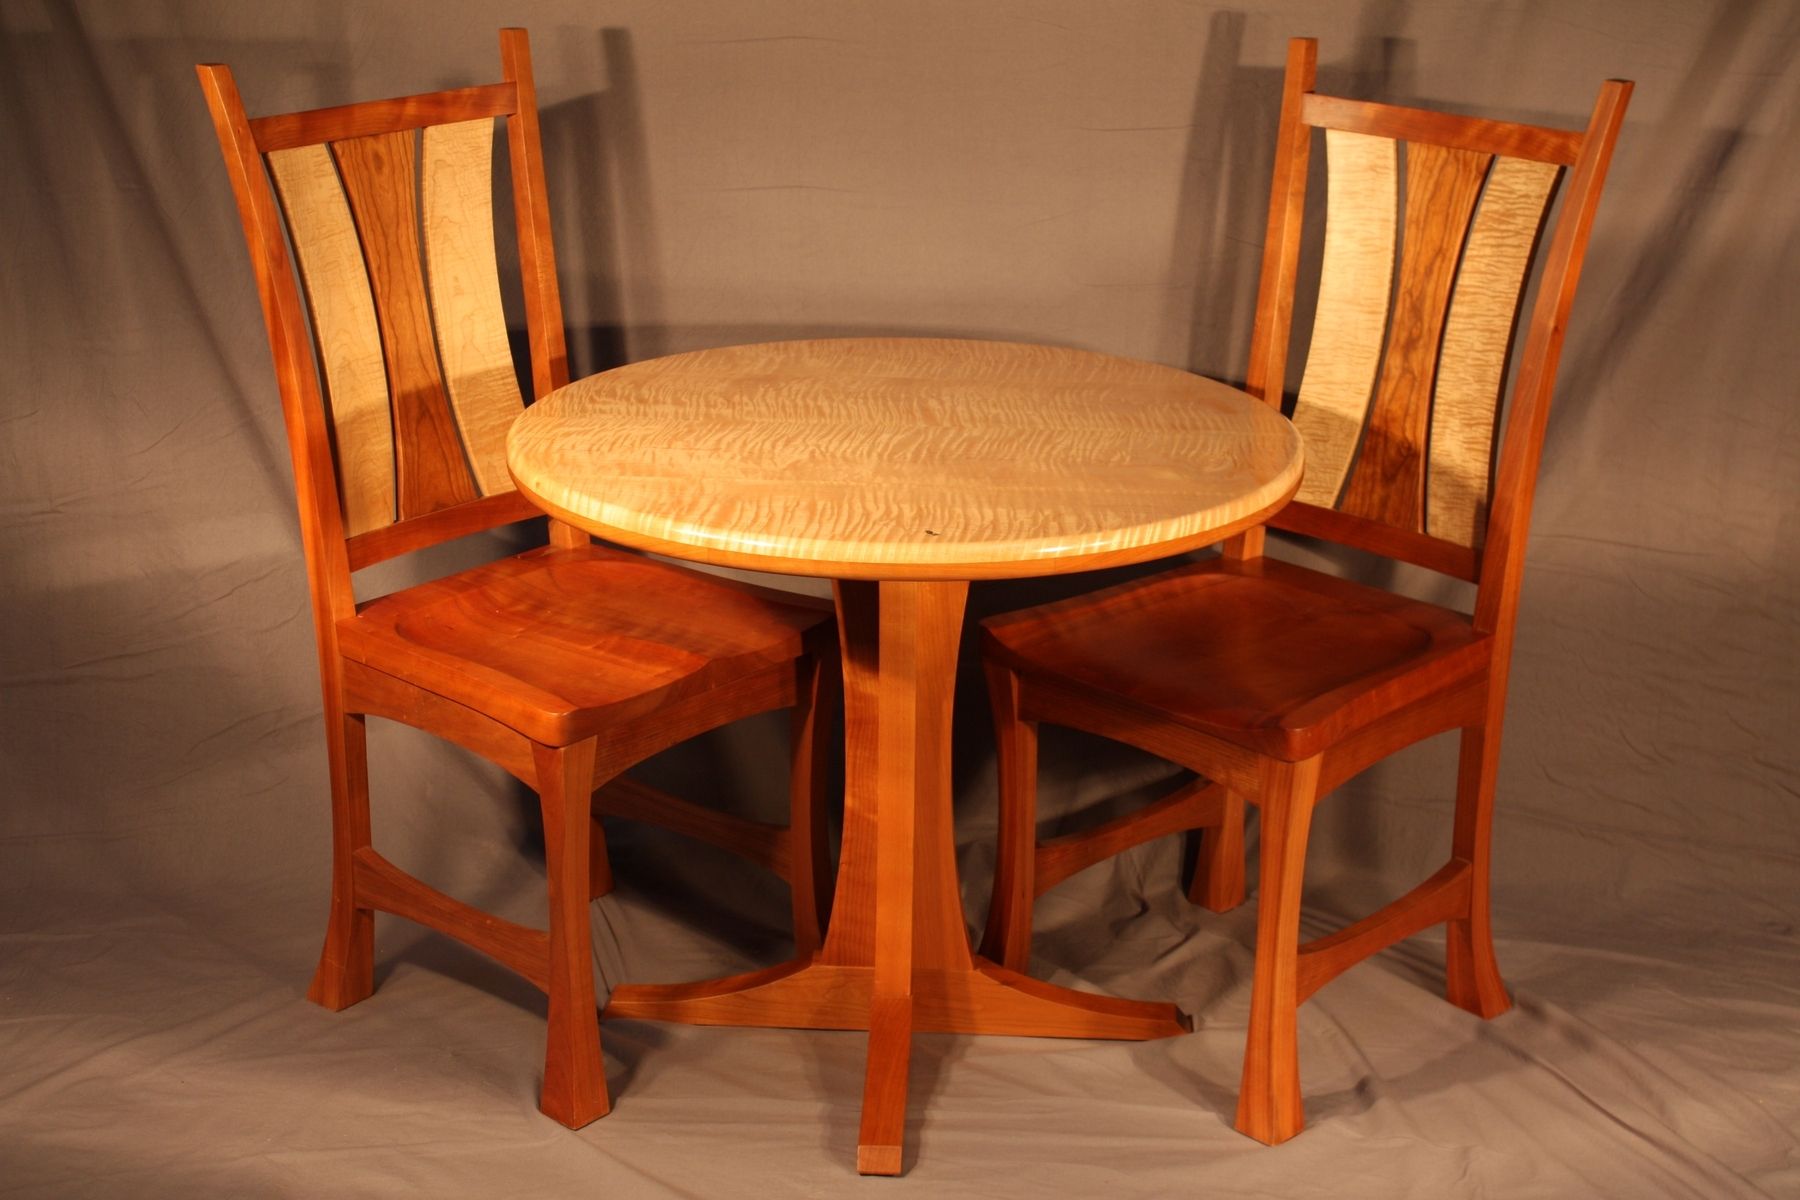 Handmade Cafe Table And Chairs by Douglas Wood Designs | CustomMade.com